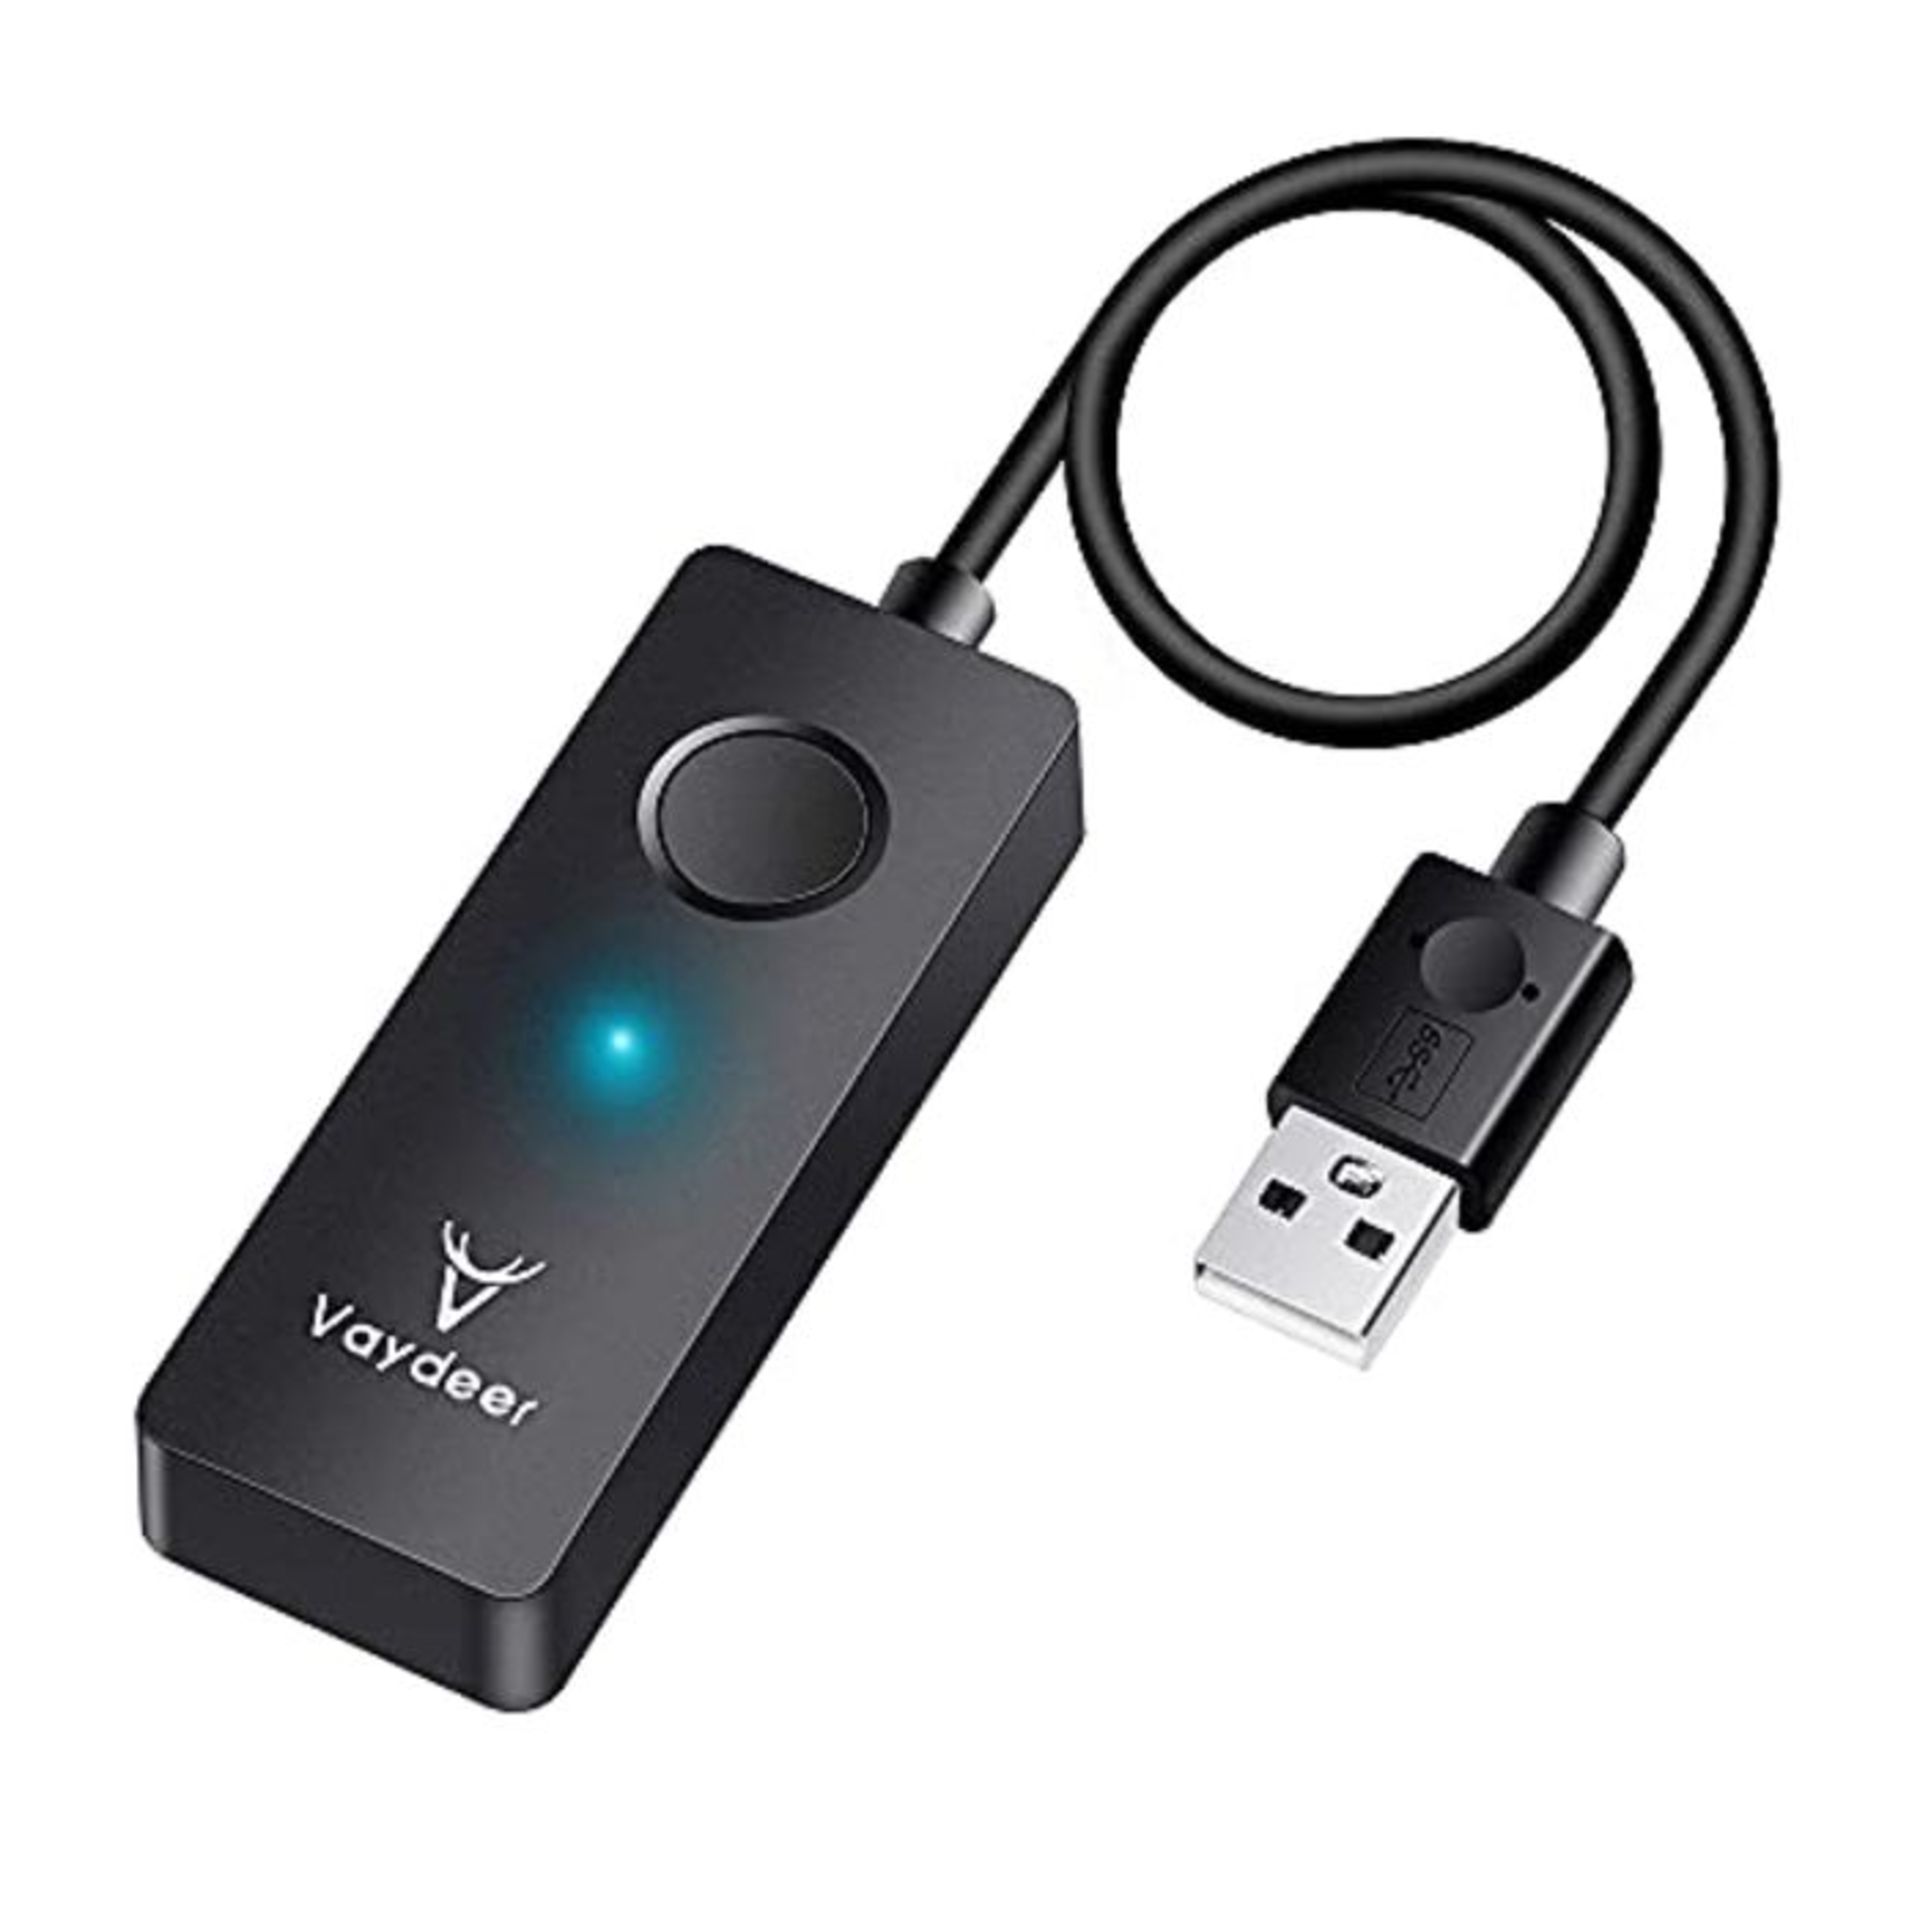 Vaydeer USB Port Mouse Jiggler,Mouse Mover Shaker,Drive-free,with ON/OFF Switch,Simula